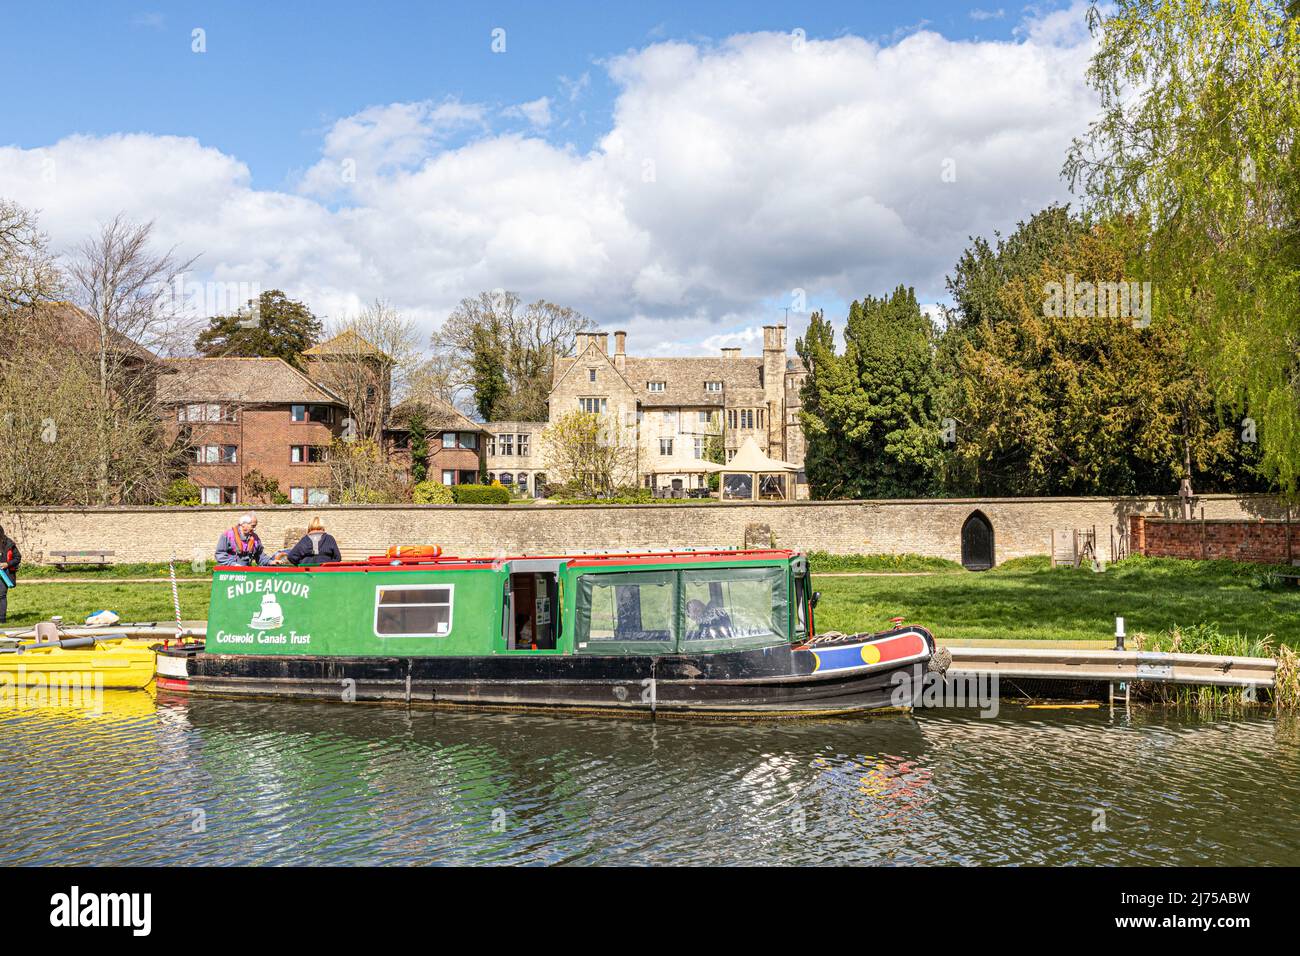 The Cotswold Canals Trust long boat Endeavour on the restored Stroudwater Canal at Stonehouse Court Hotel, Stonehouse, Gloucestershire, England UK Stock Photo